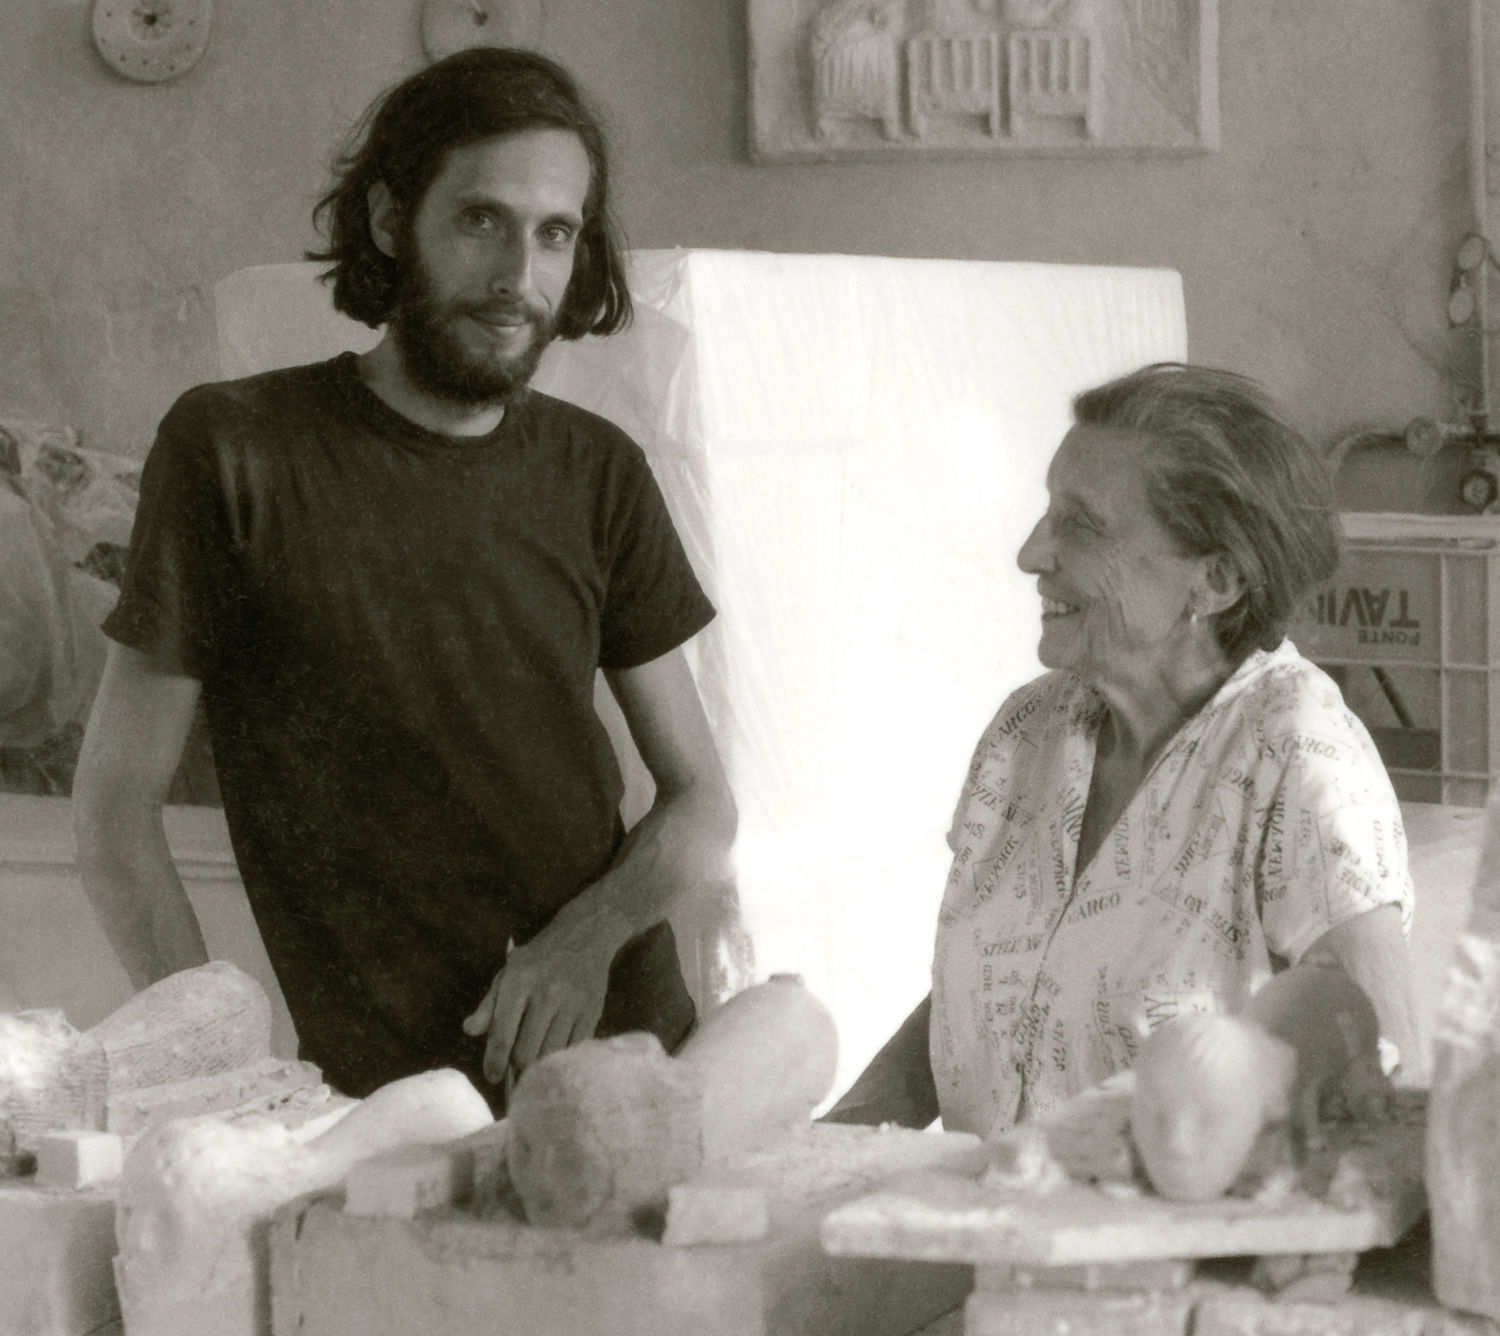 Louise Bourgeois and her assistant Jerry Gorovoy in Carrara, Italy in 1981 with works in progress. Photo: &copy; The Easton Foundation